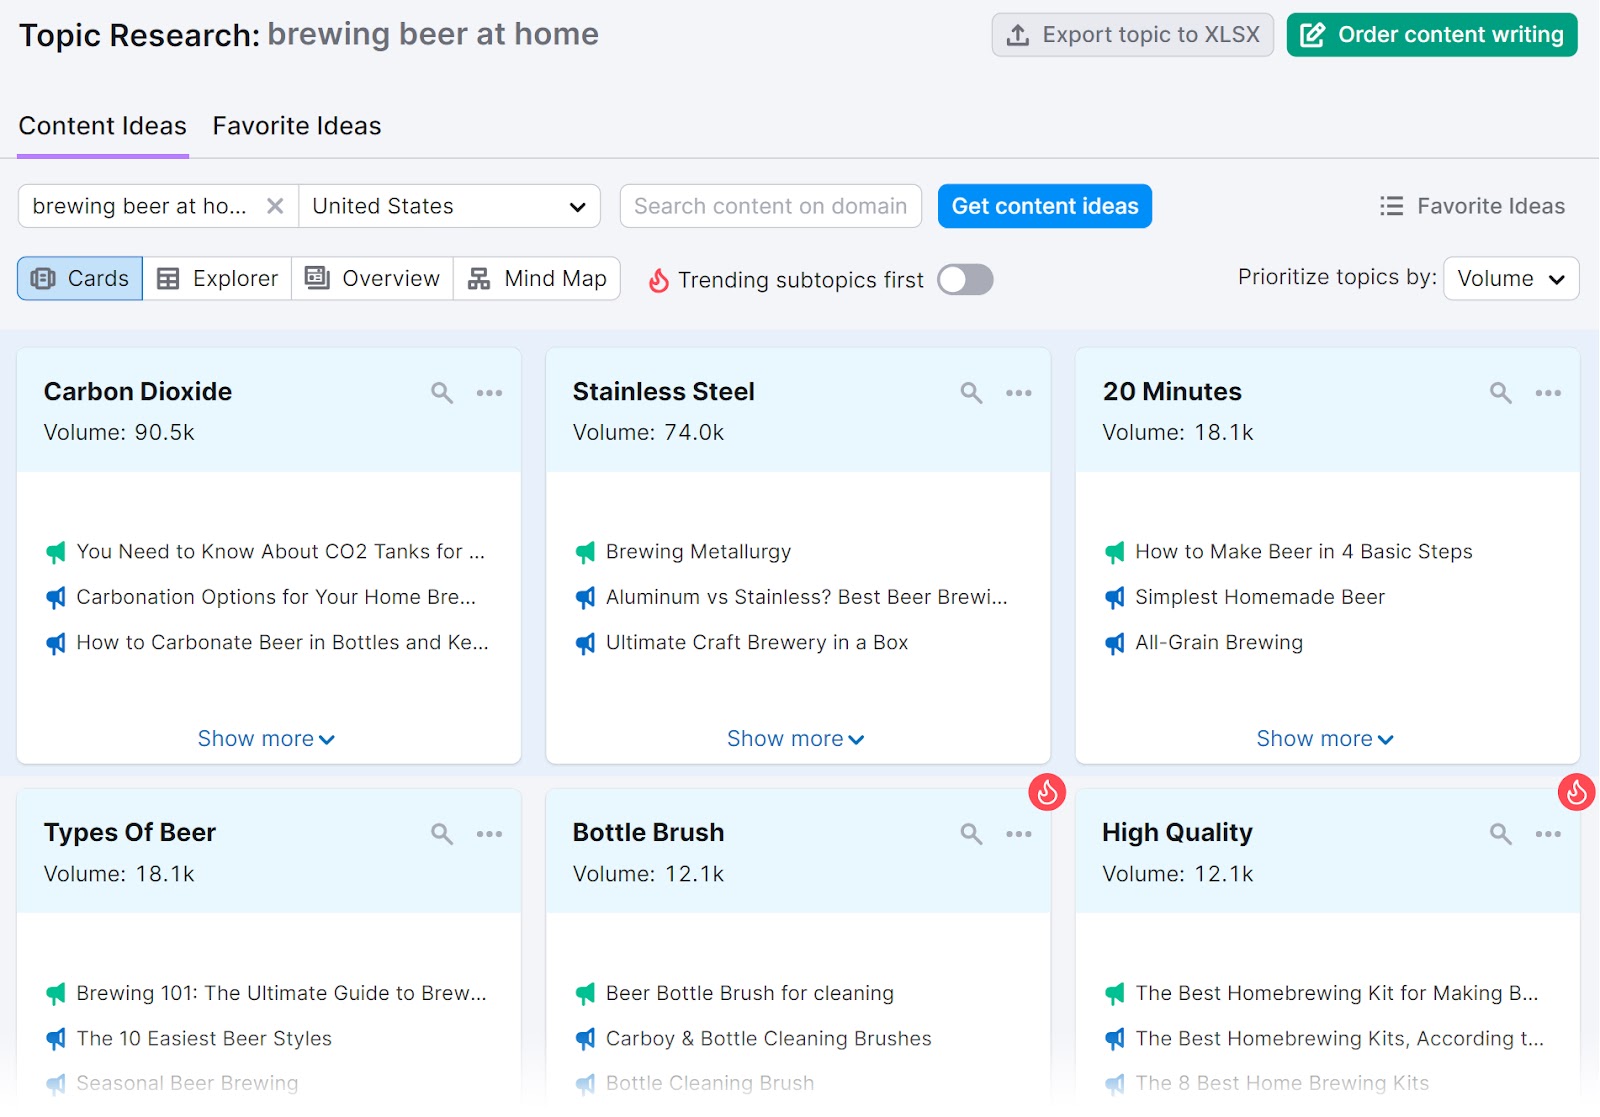 "Content Ideas" dashboard for "brewing beer at home" in Topic Research tool